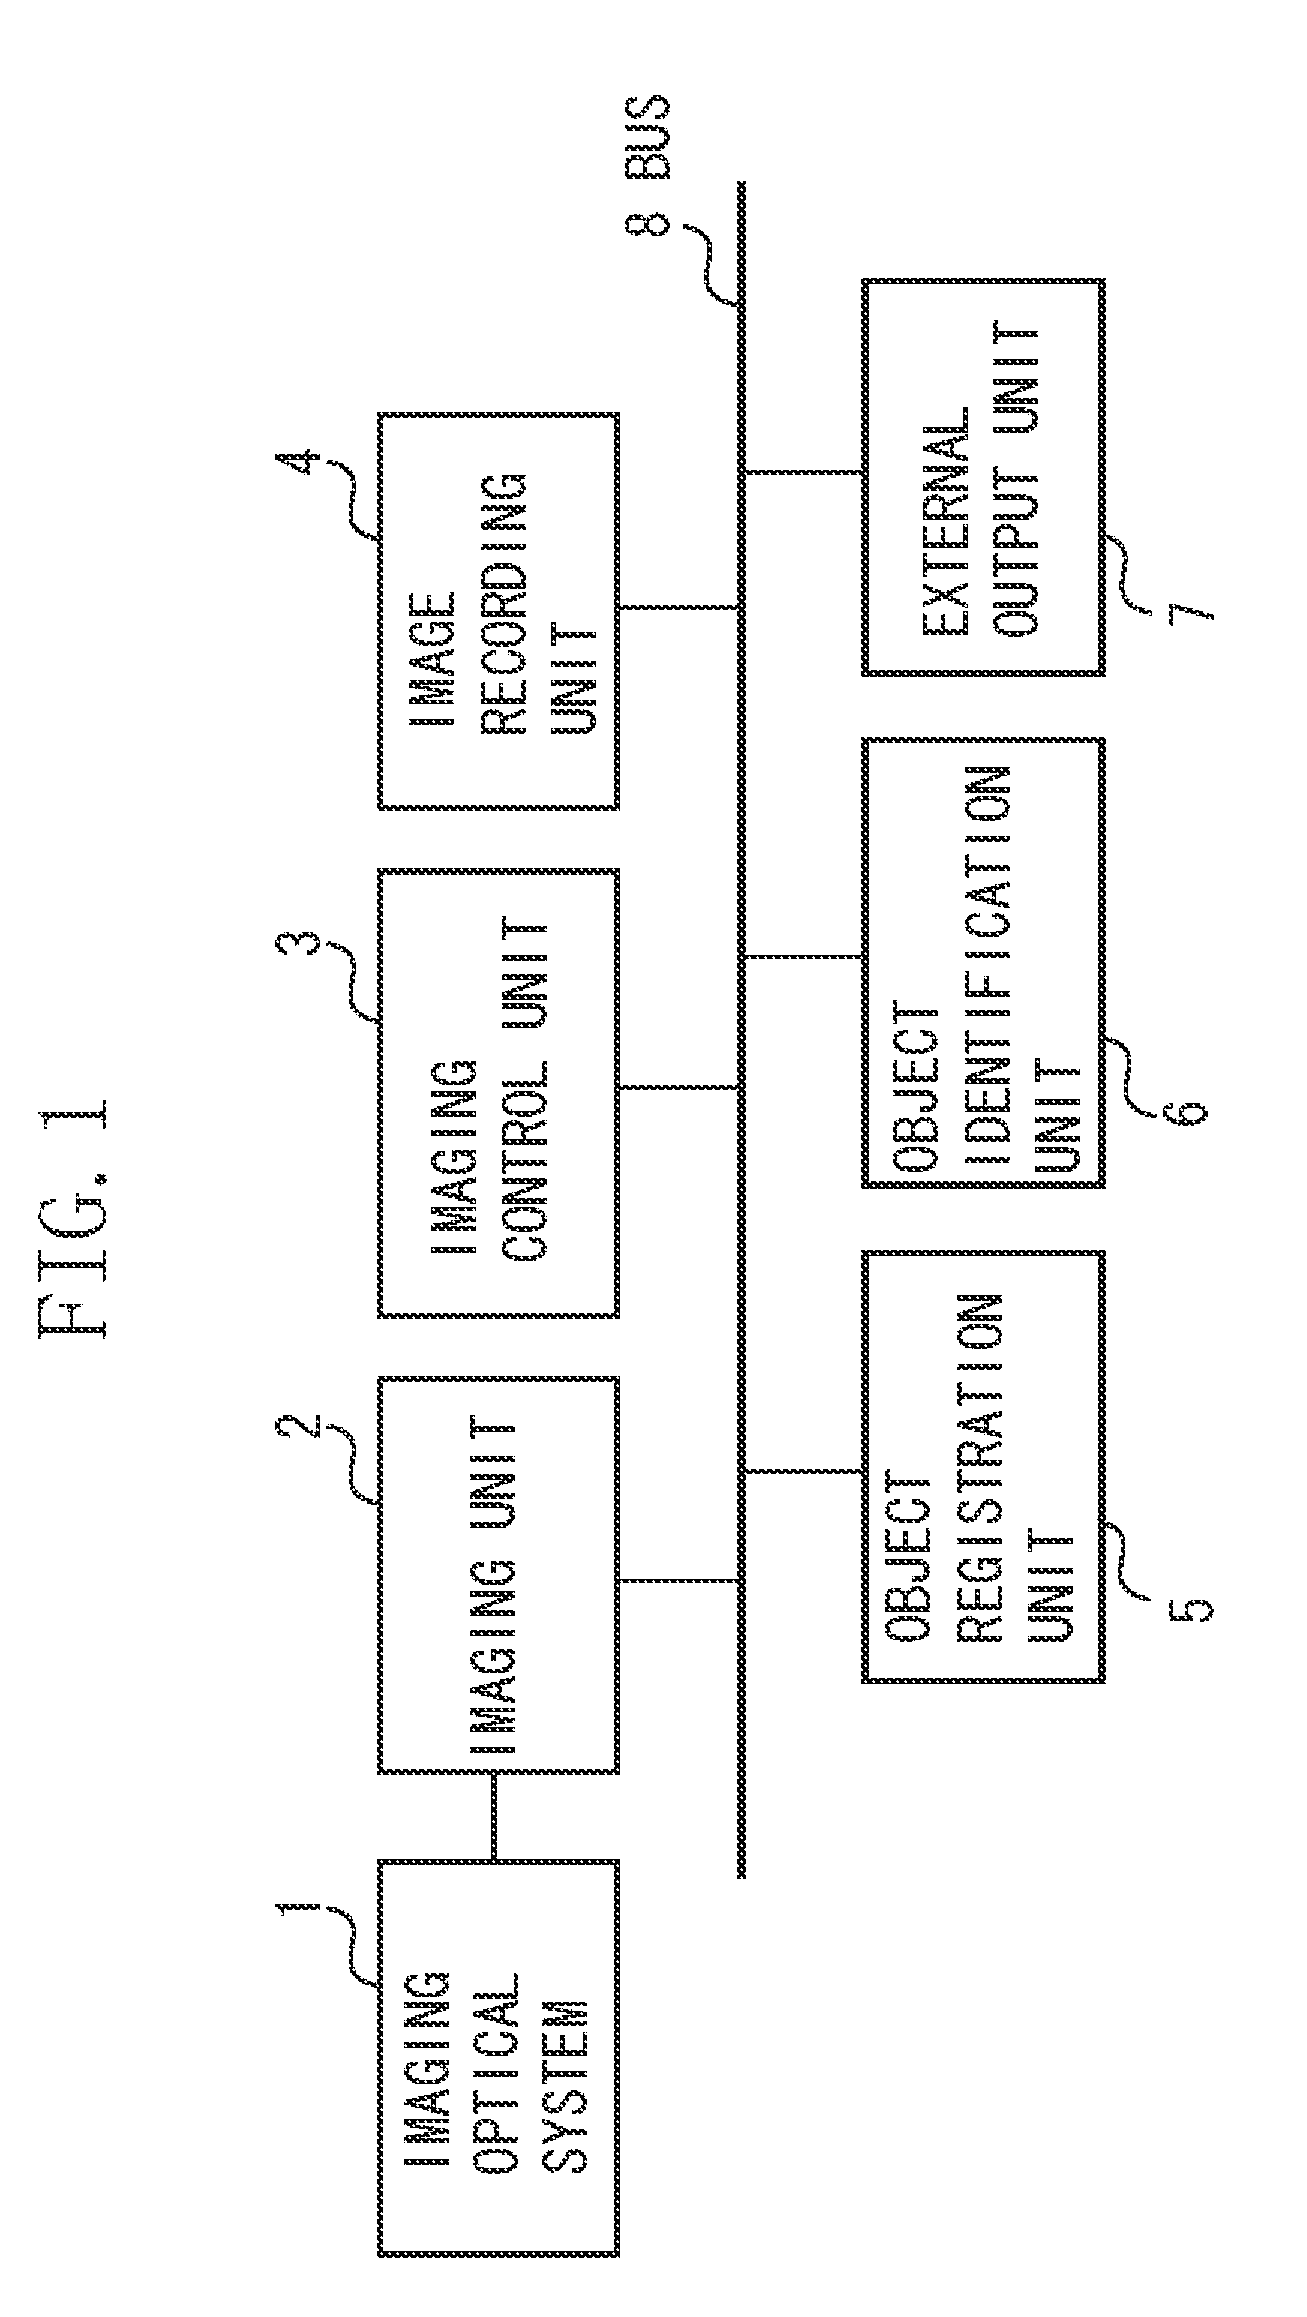 Object identification apparatus and method for identifying object